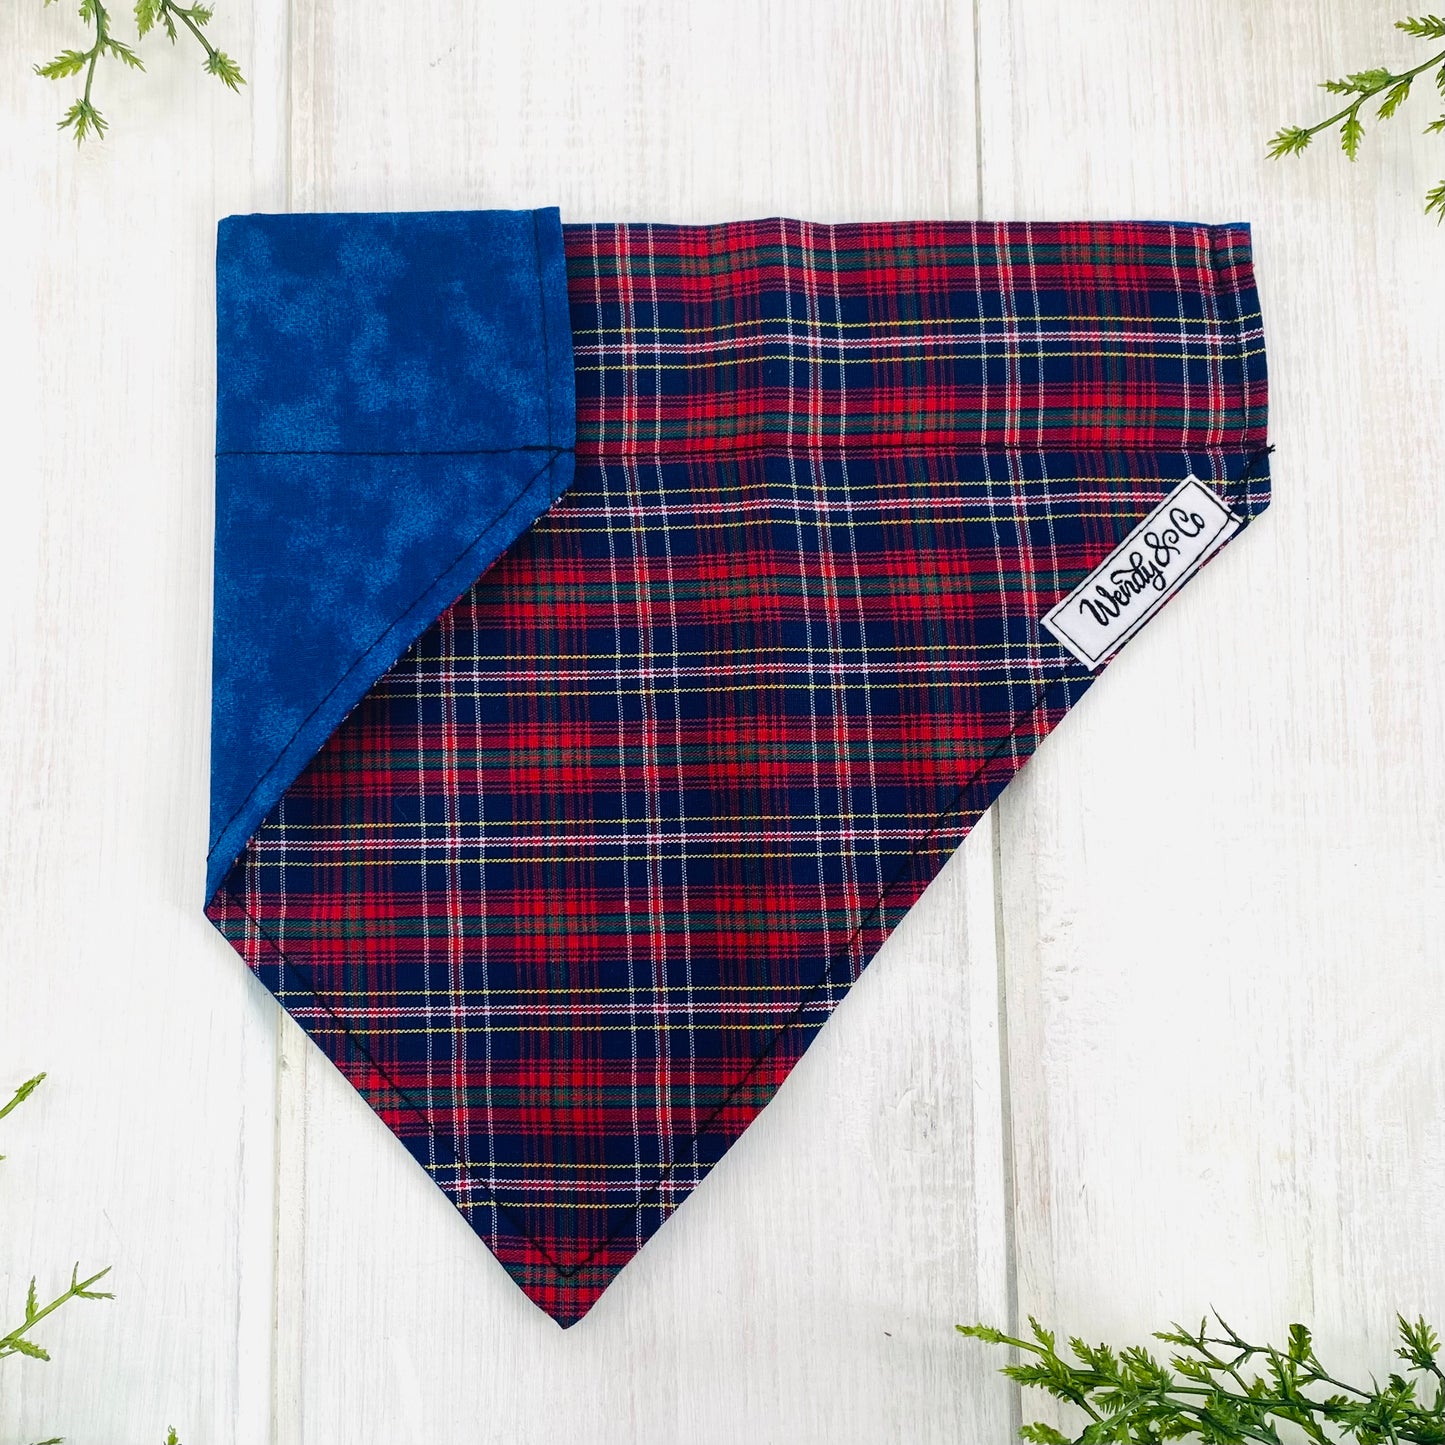 Reversible dog bandana in navy and red plaid with navy reverse.